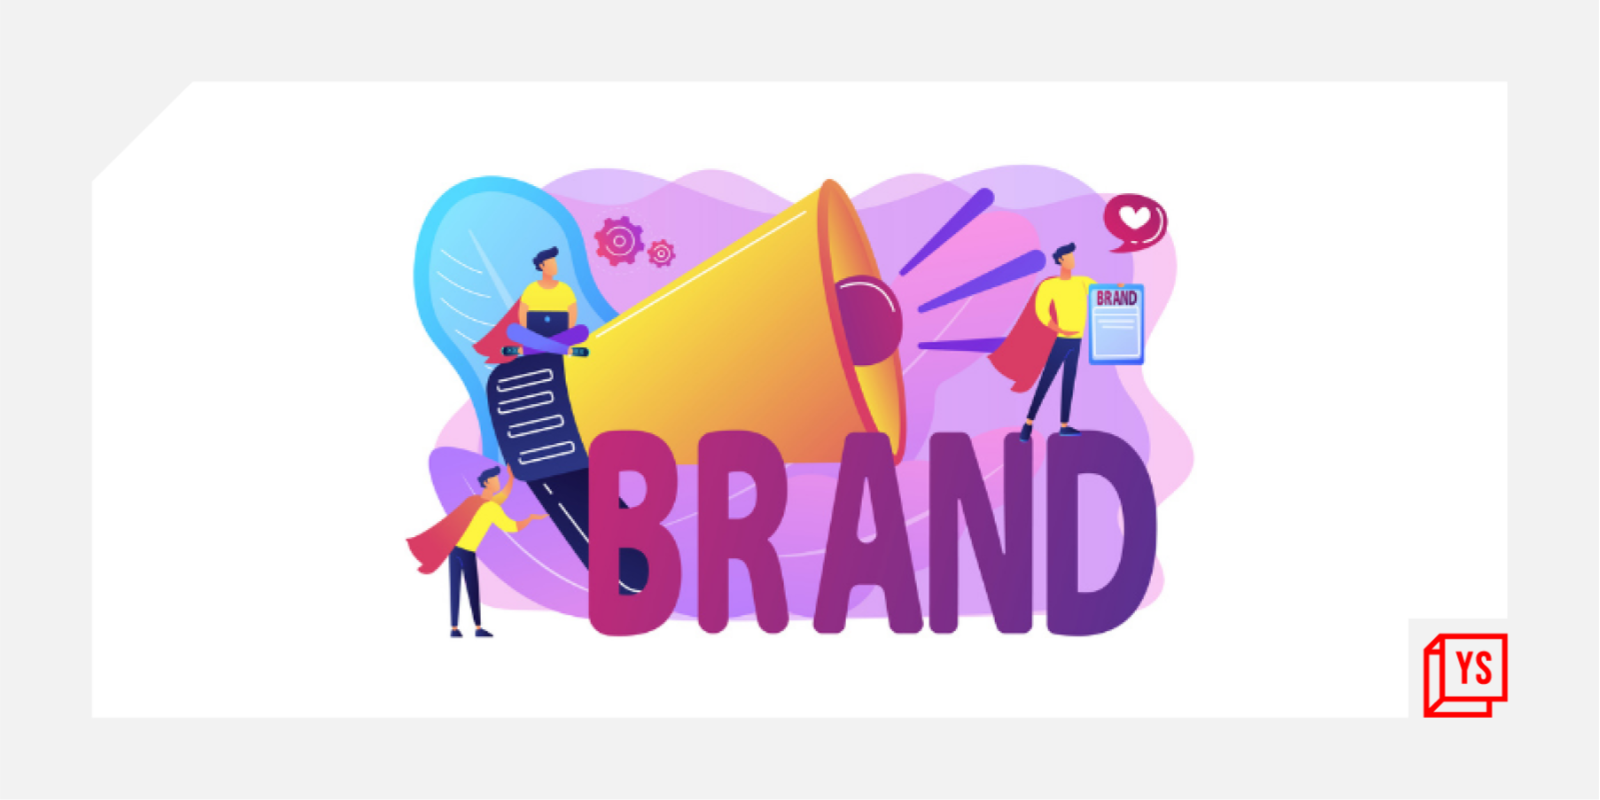 Brand personality wars: How similar brands thrive by being worlds apart 
